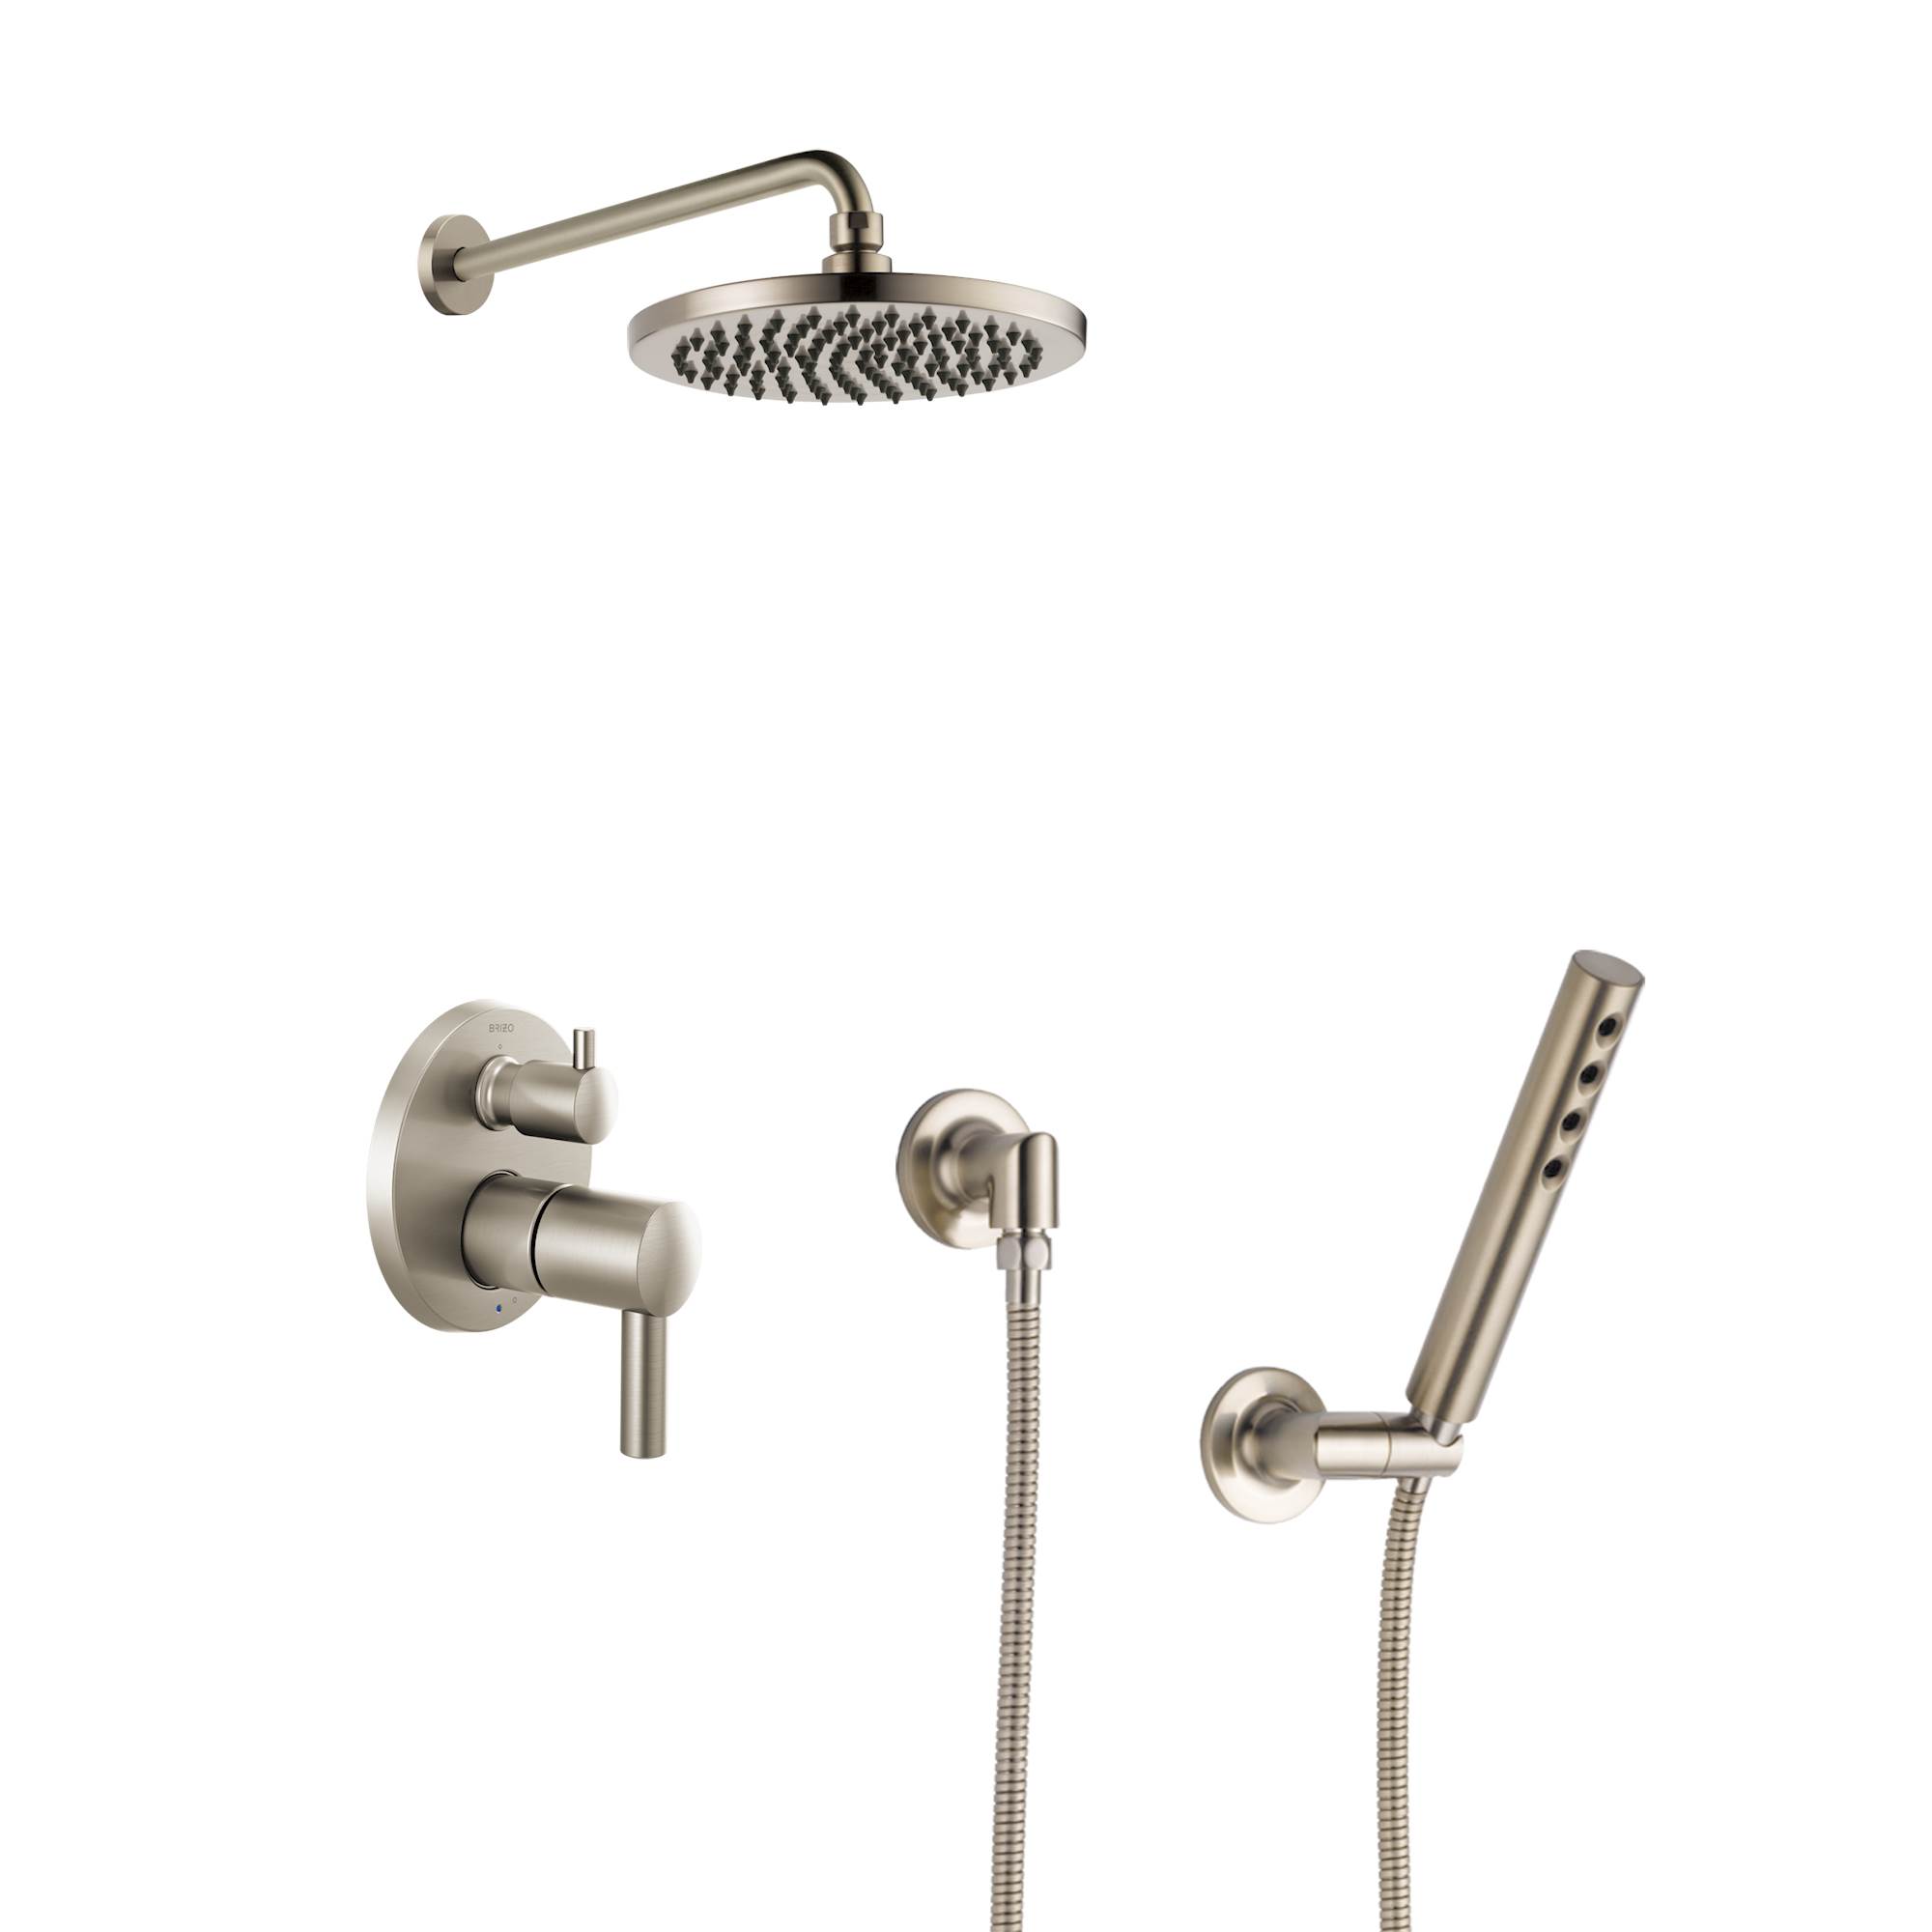 Brizo Odin Shower Set with 8 Showerhead and Handheld in Brushed Nickel